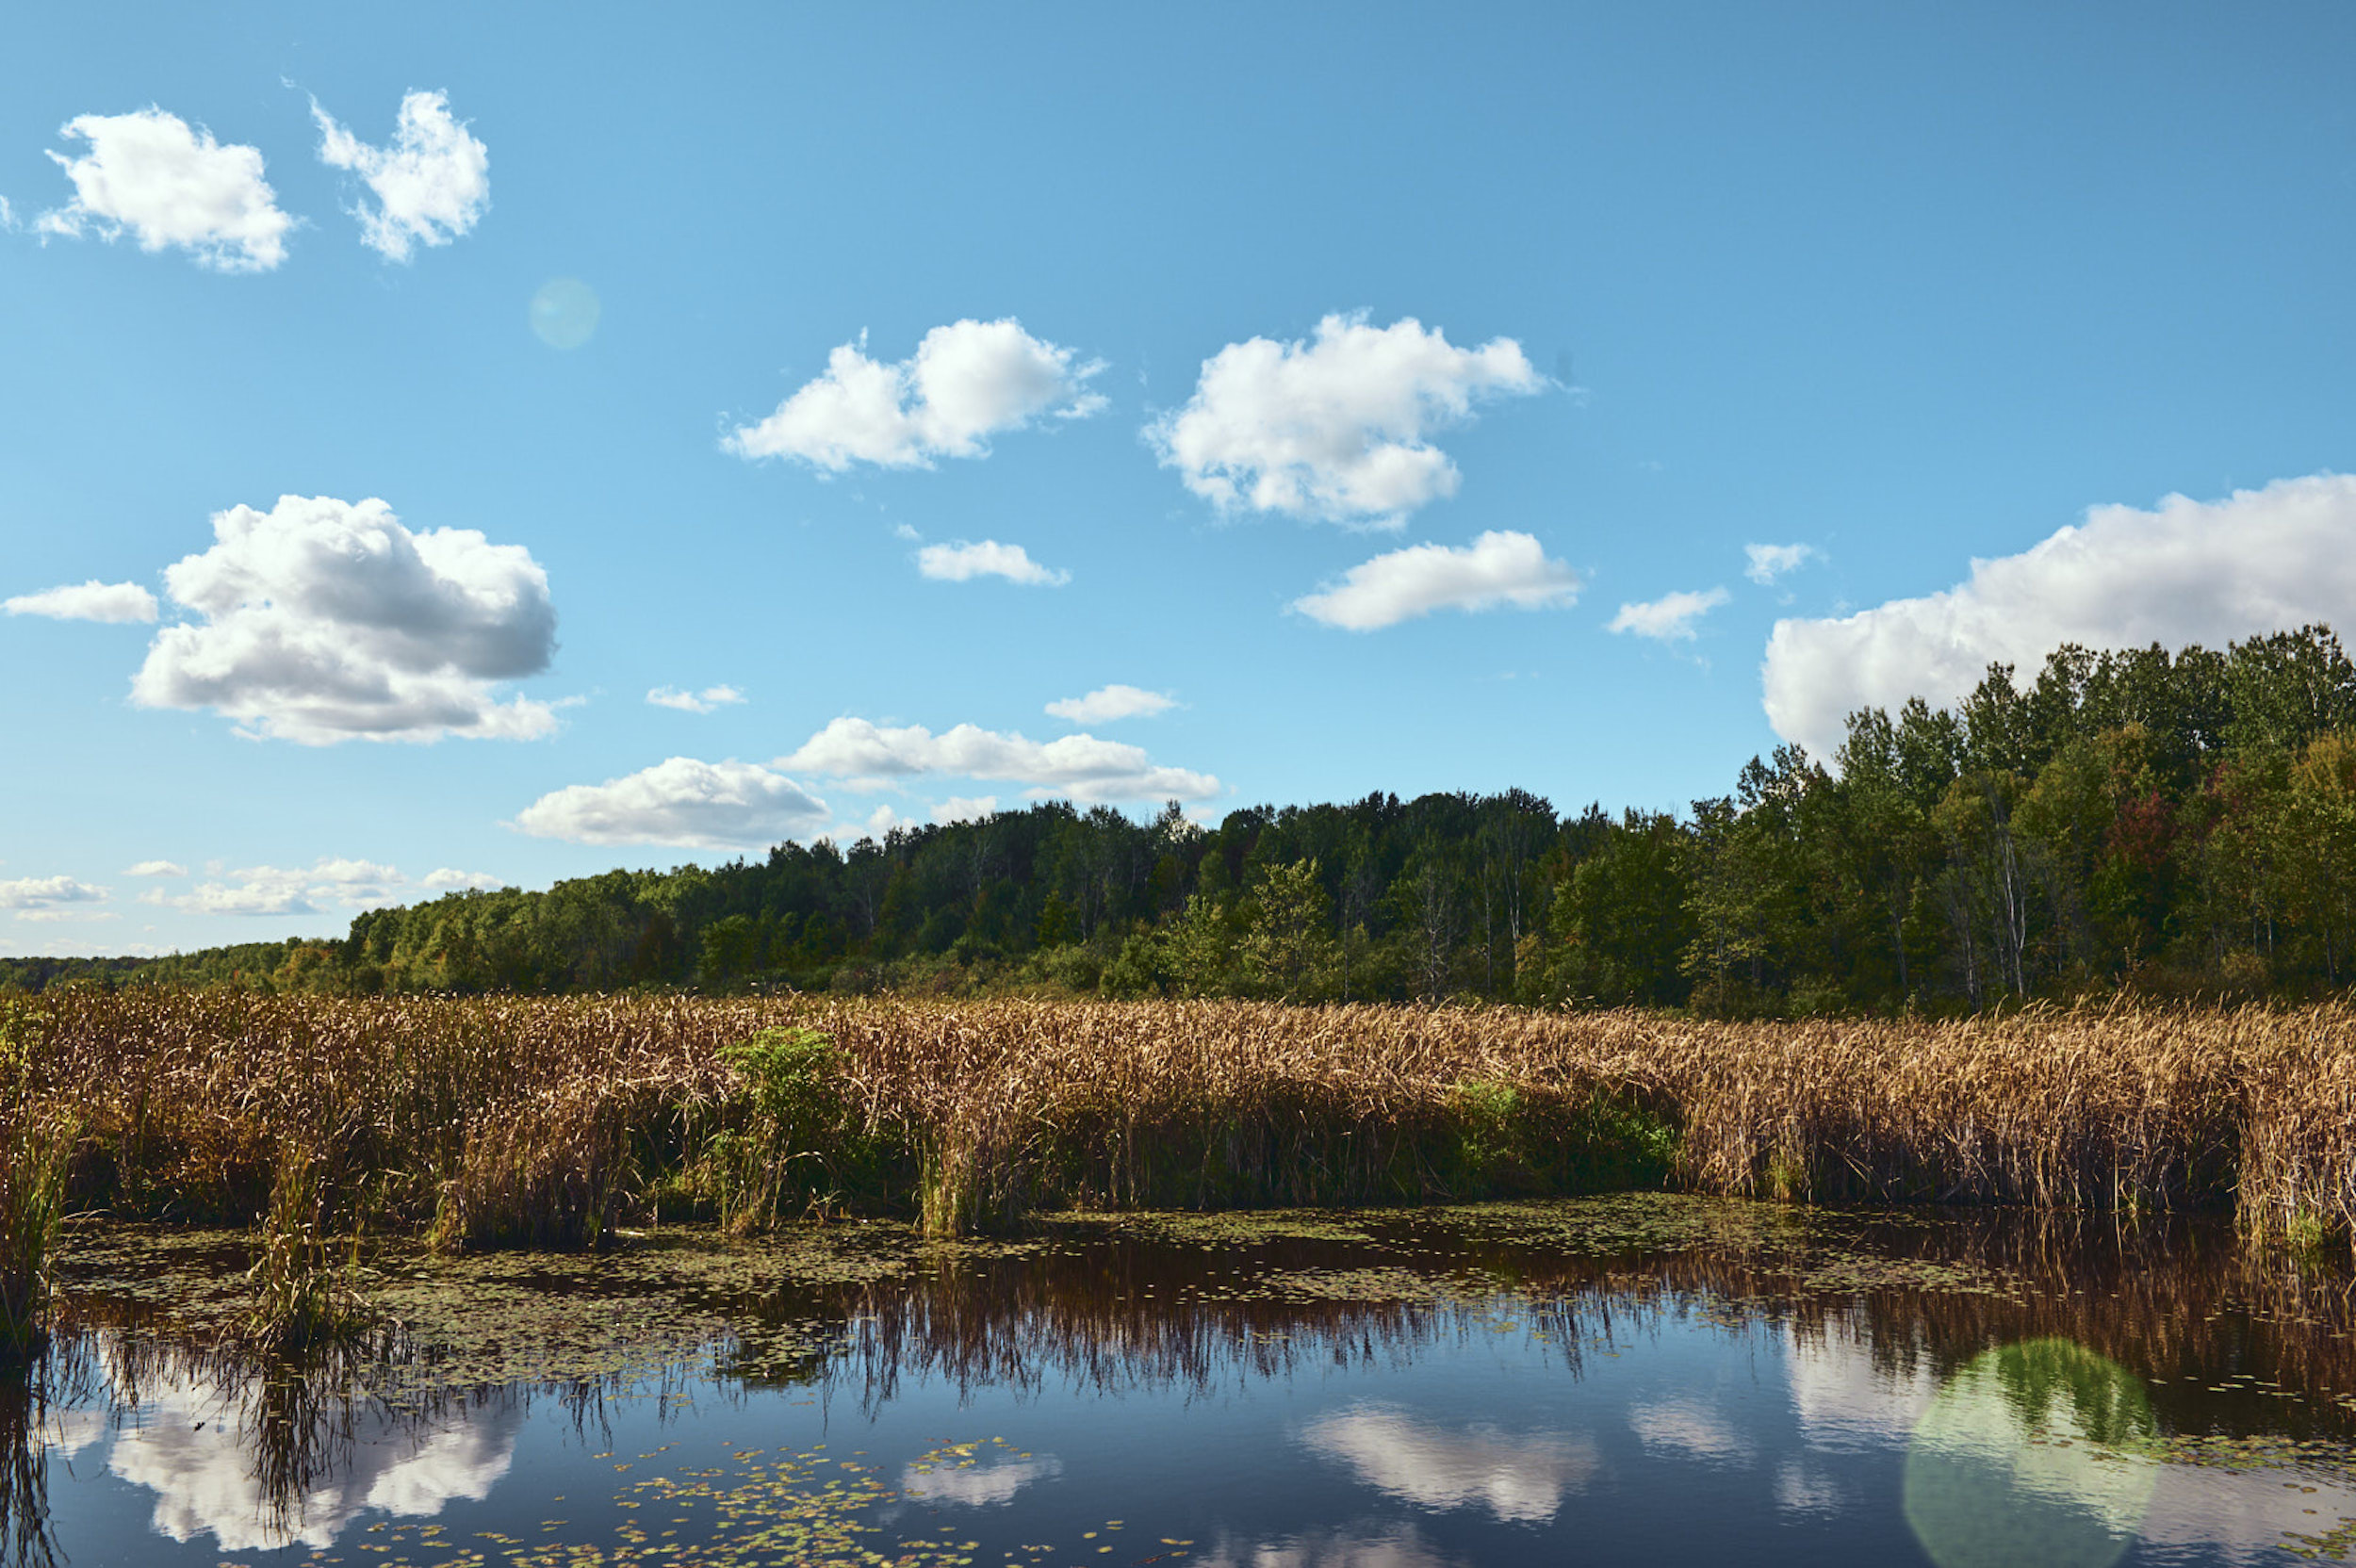 The Mer Bleue Bog is a provincially recognized natural wetland. It’s home to several provincially significant plants, birds and wildlife. Photo: Adrienne Row-Smith